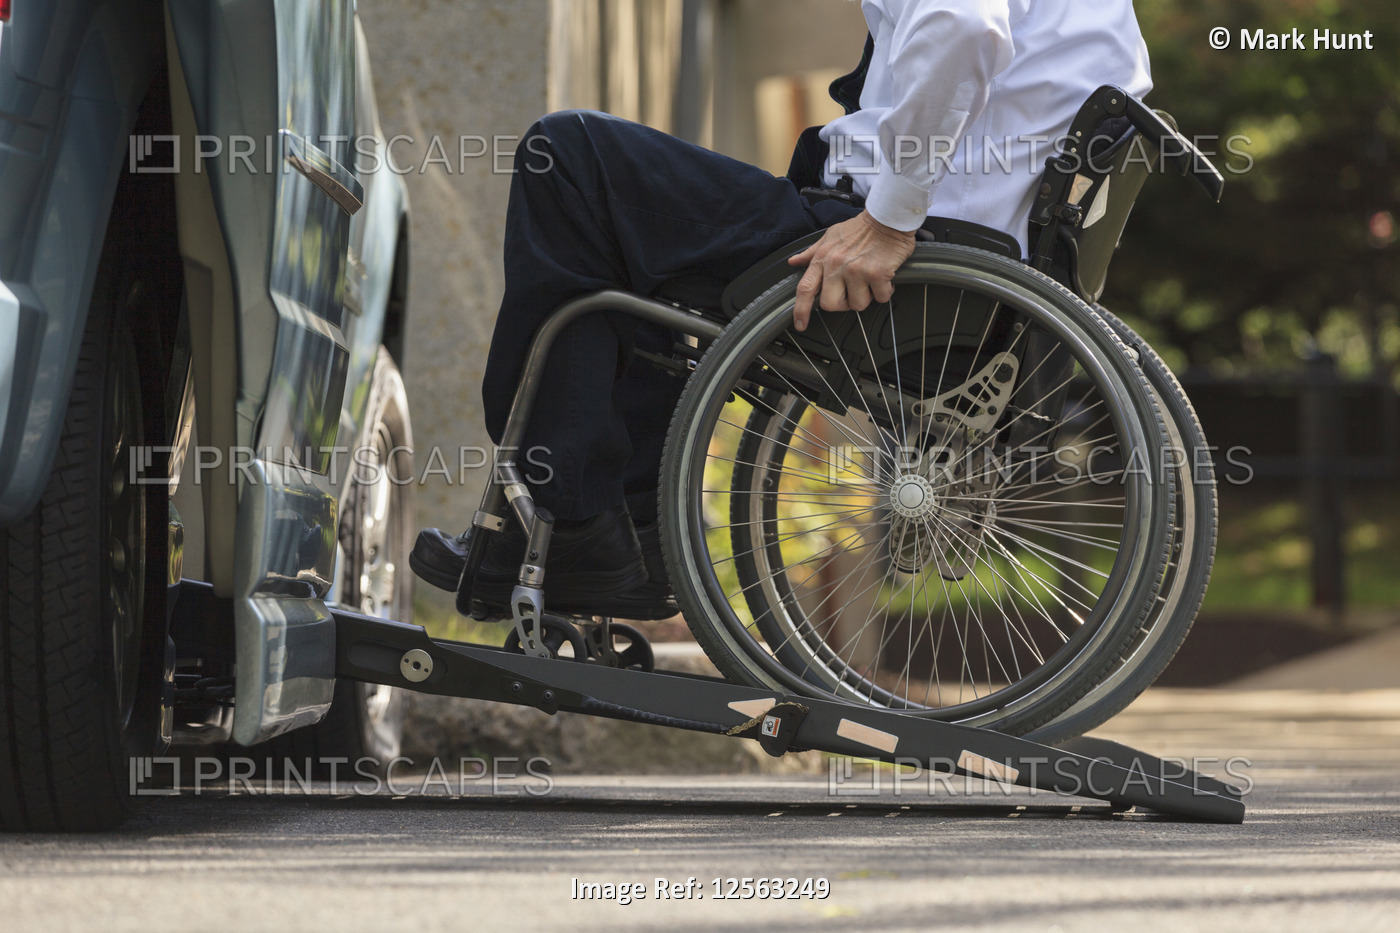 Businessman with Muscular Dystrophy in a wheelchair entering his accessible van ...